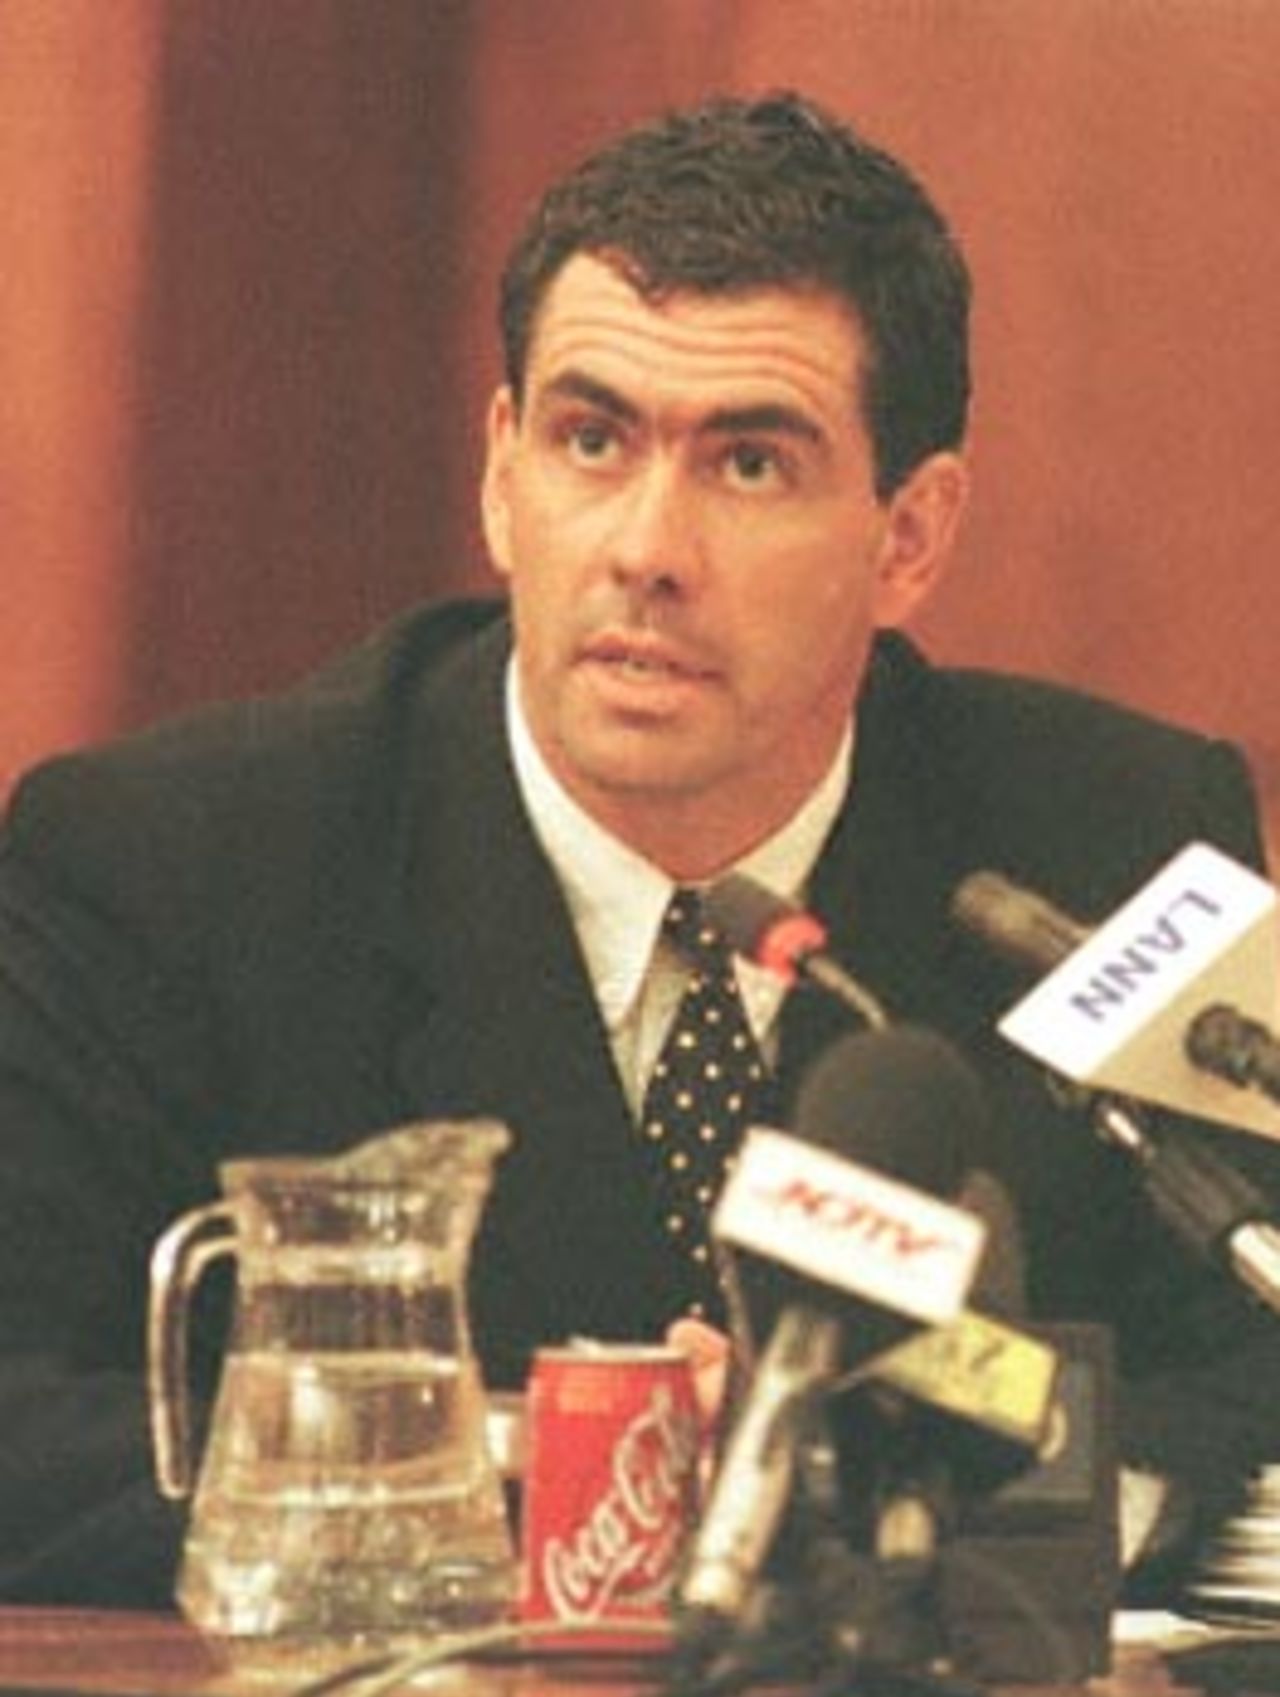 Former South African cricket captain Hansie Cronje speaks during cross-examination at the King Commission of Inquiry into allegations of cricket match-fixing in Cape Town 21 June 2000.